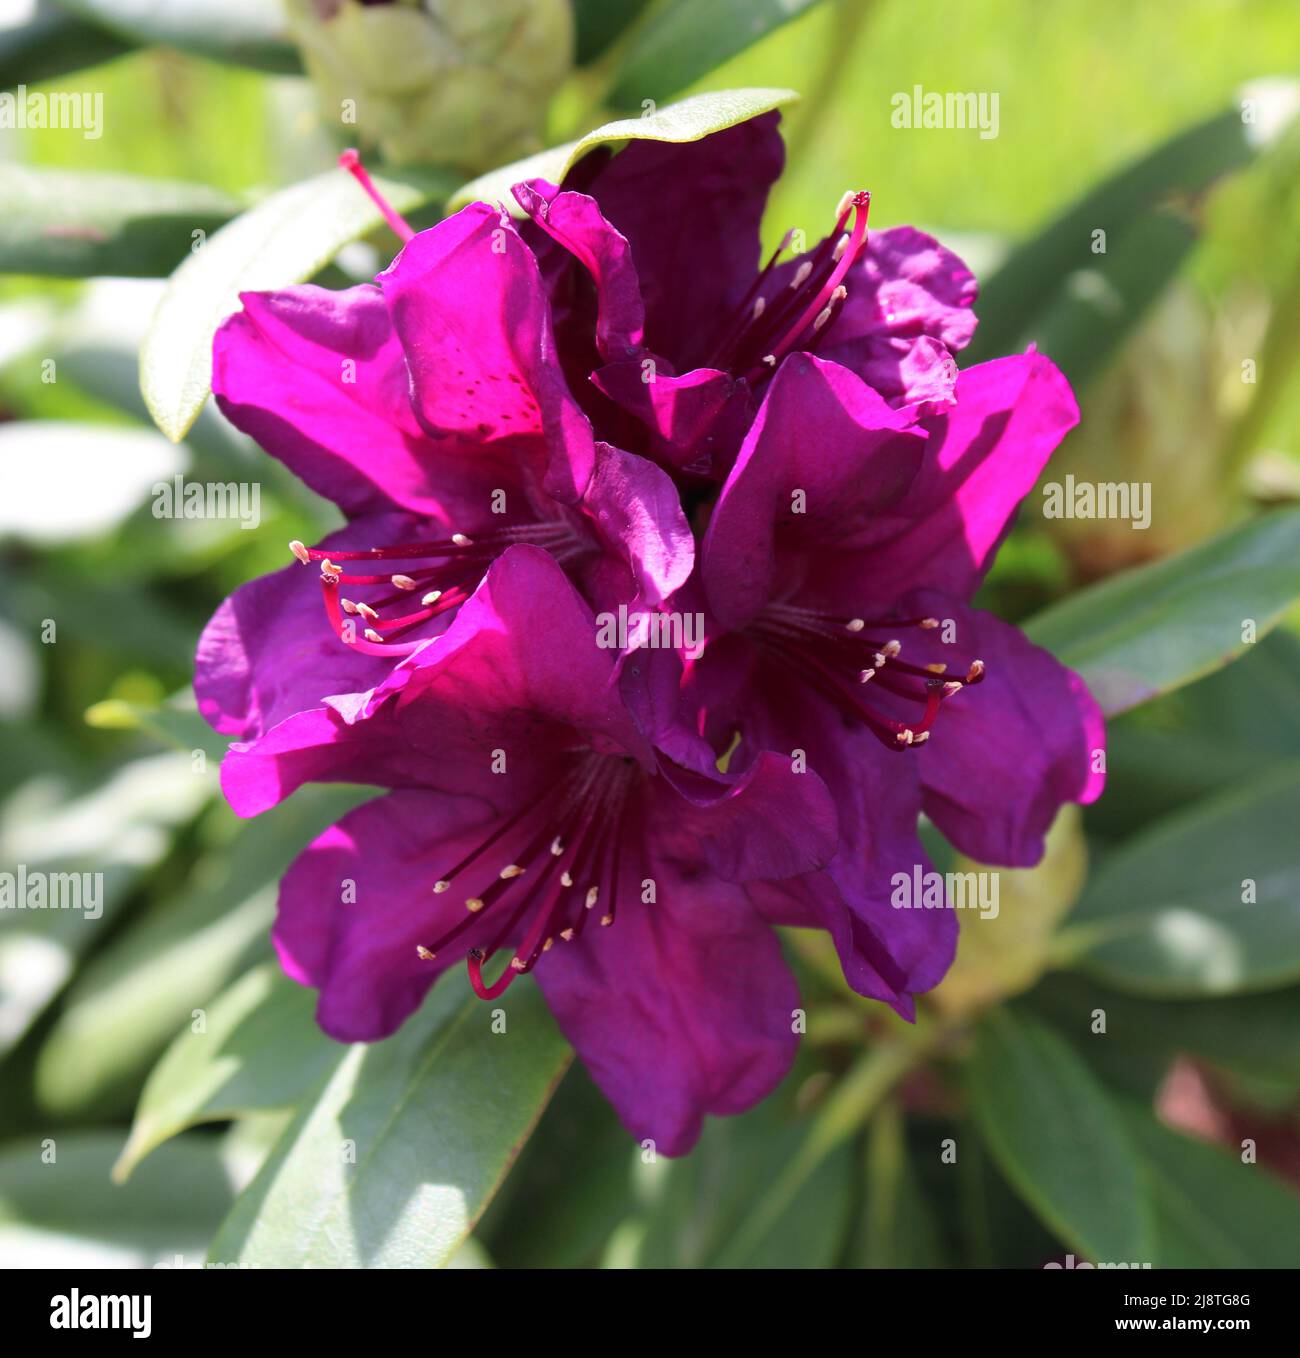 A Bloom on a Polarnacht Dwarf Rhododendron Plant Stock Photo